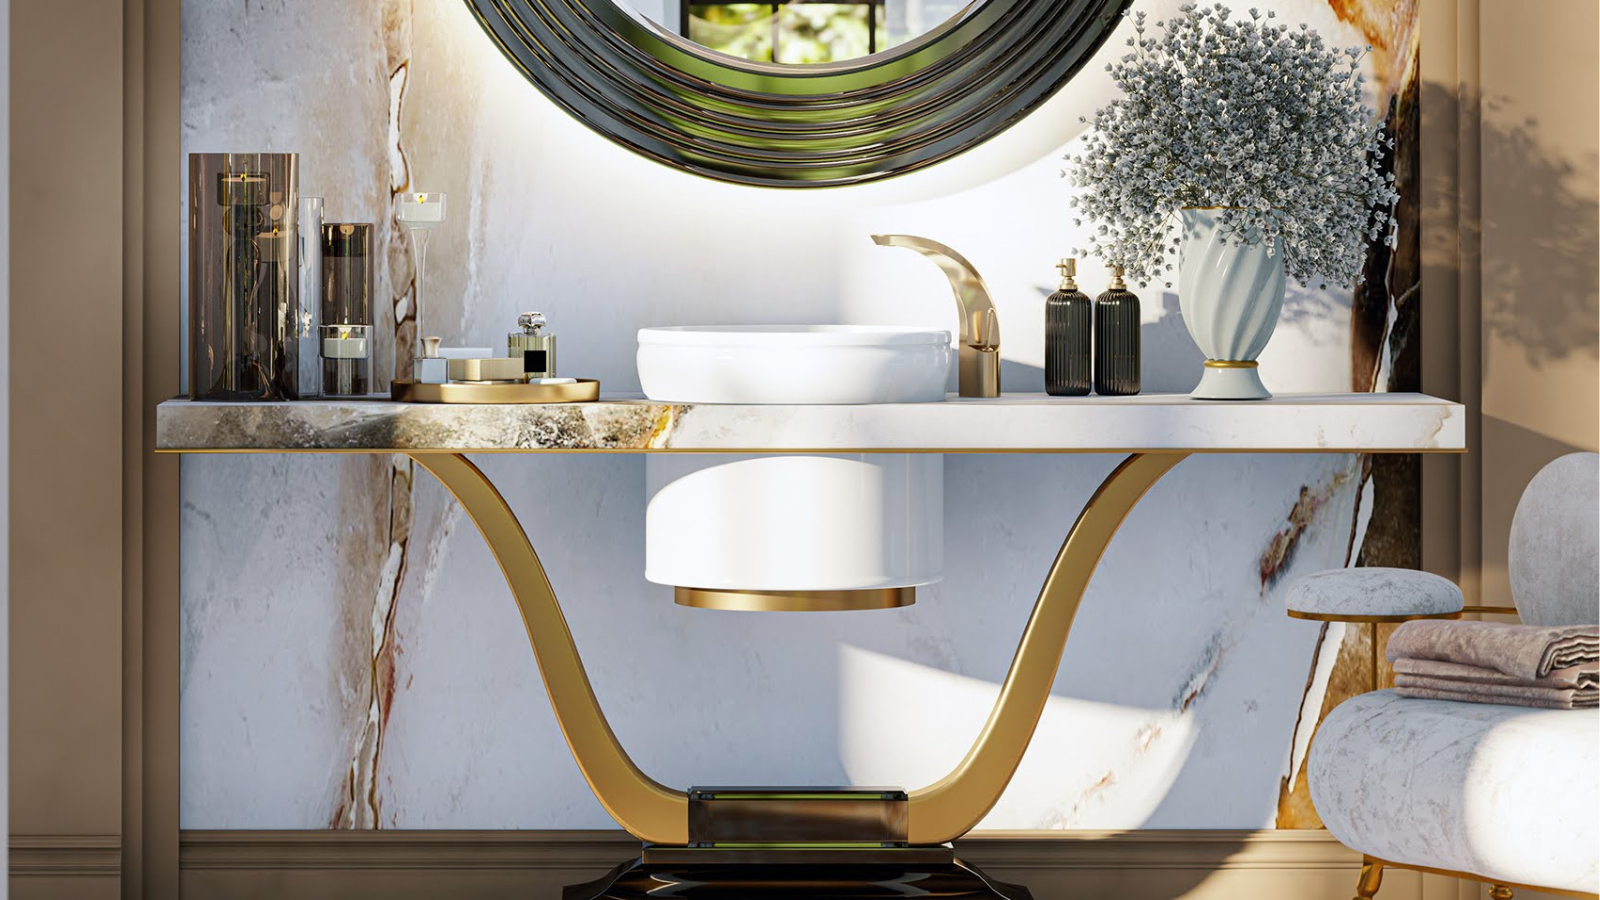 CREATING A TRANQUIL ATMOSPHERE IN THE BATH SPACE